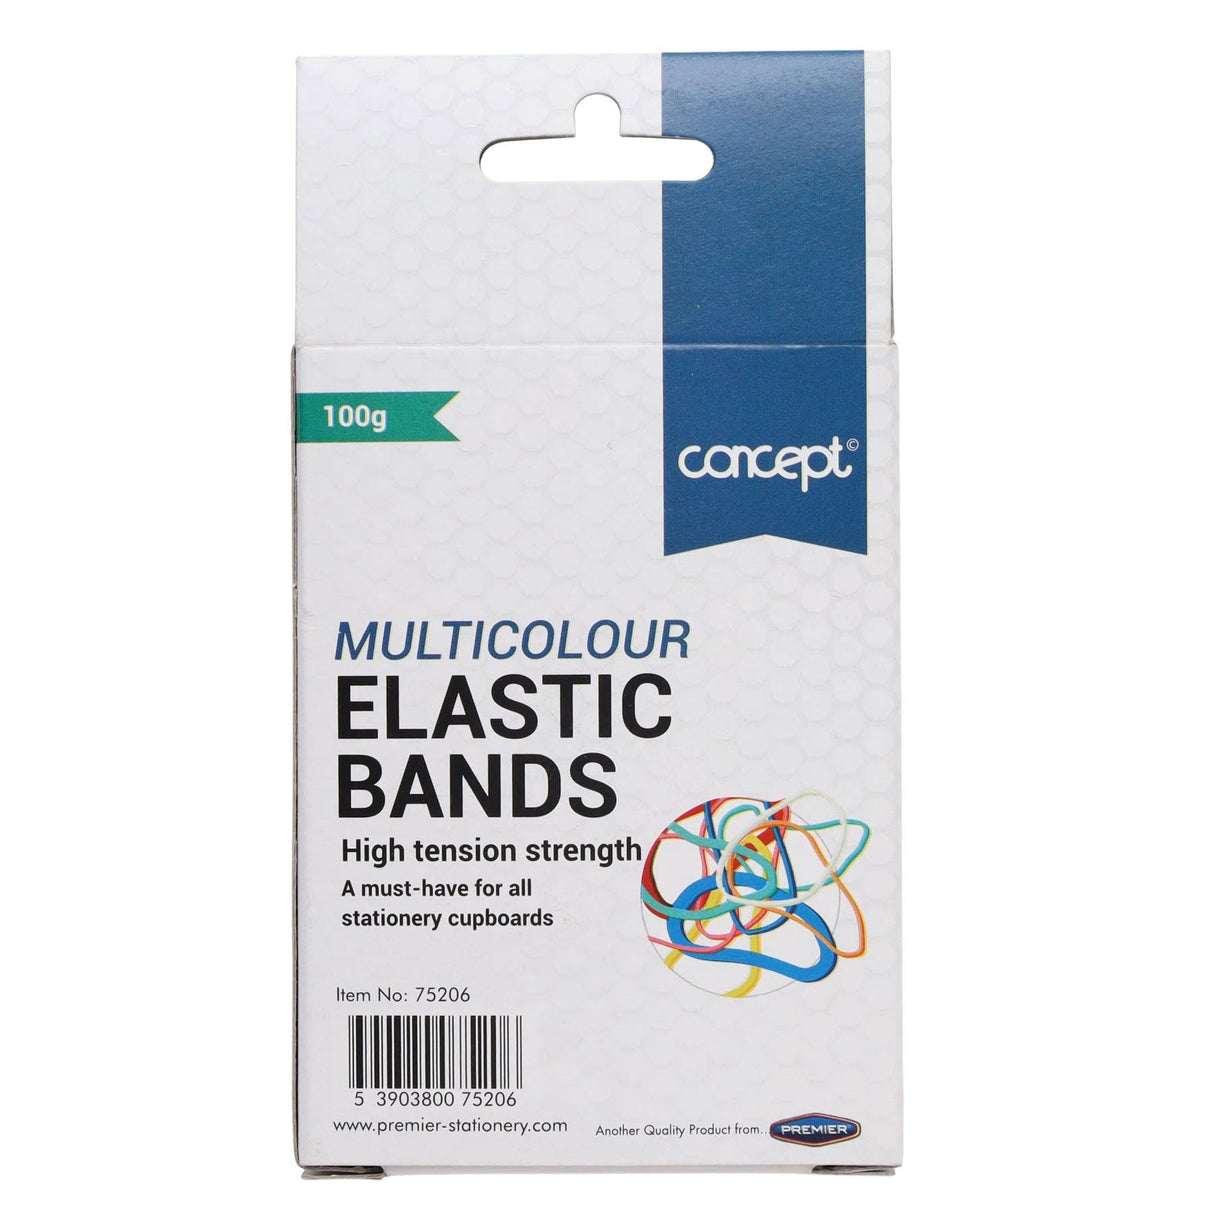 Concept Rubber Bands - Various Sizes - 100g Box | Stationery Shop UK